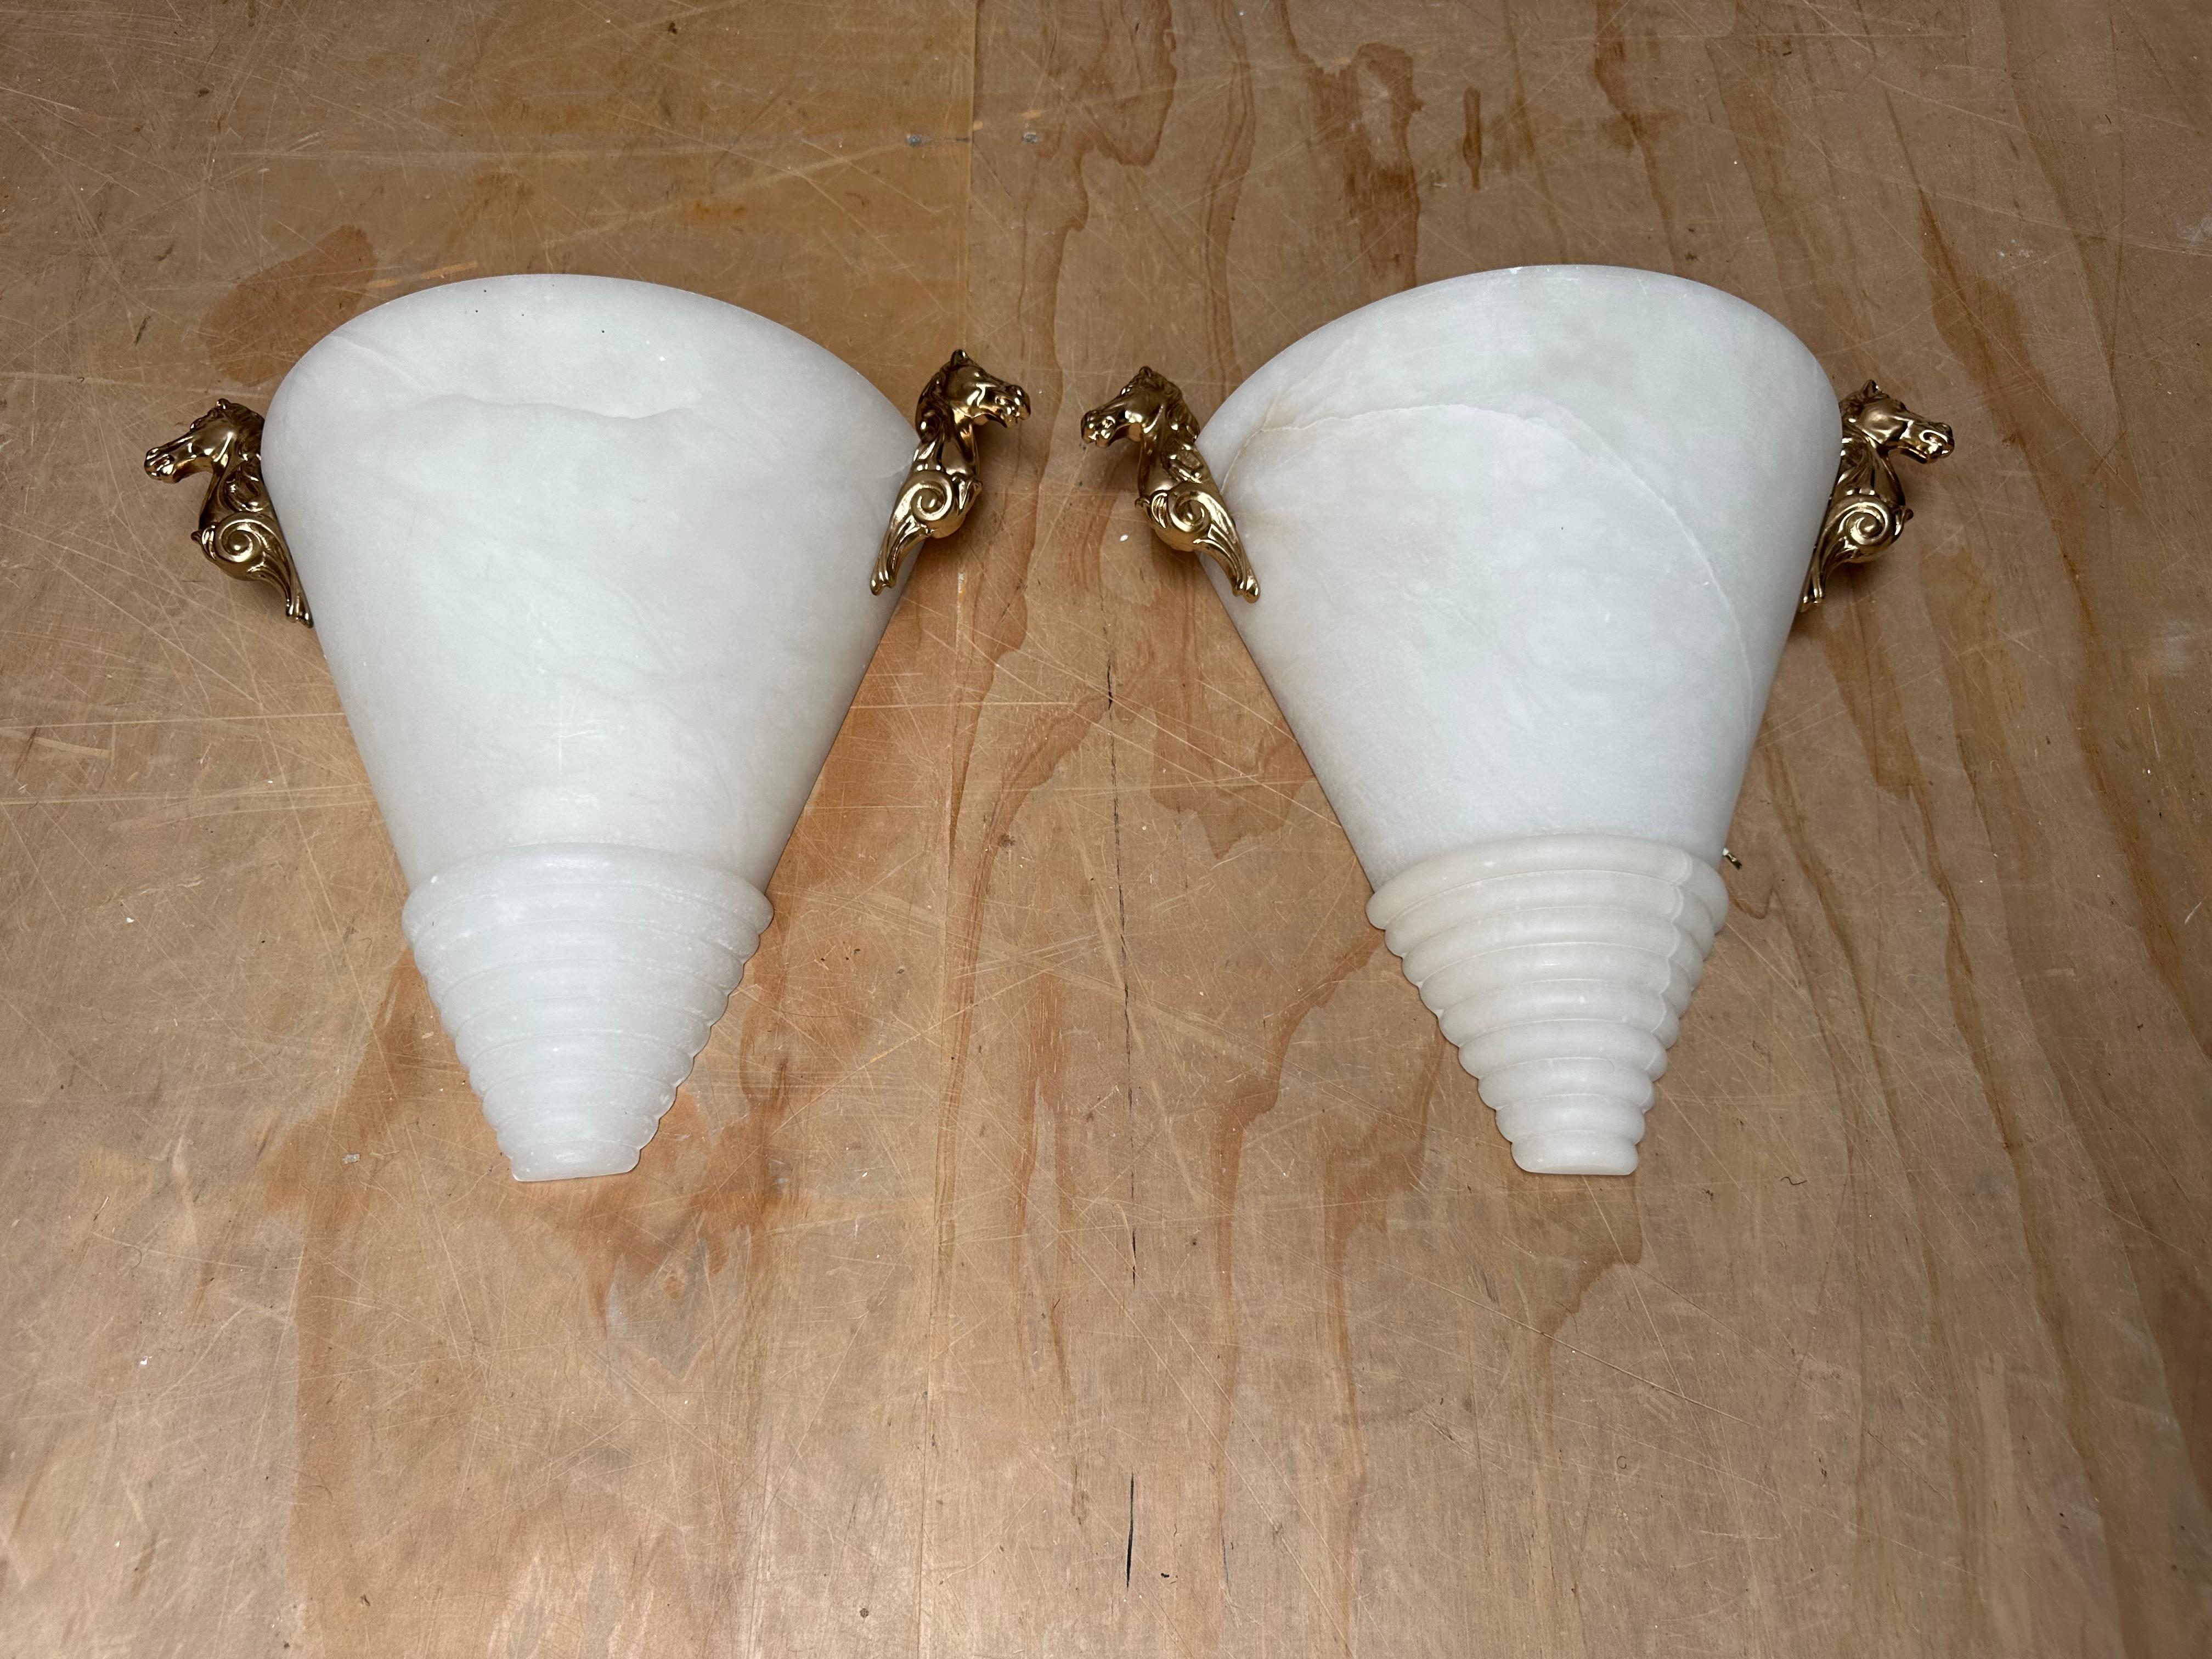 Midcentury Modern Italy Pair Art Deco Style Alabaster Sconces w Horse Sculptures For Sale 10